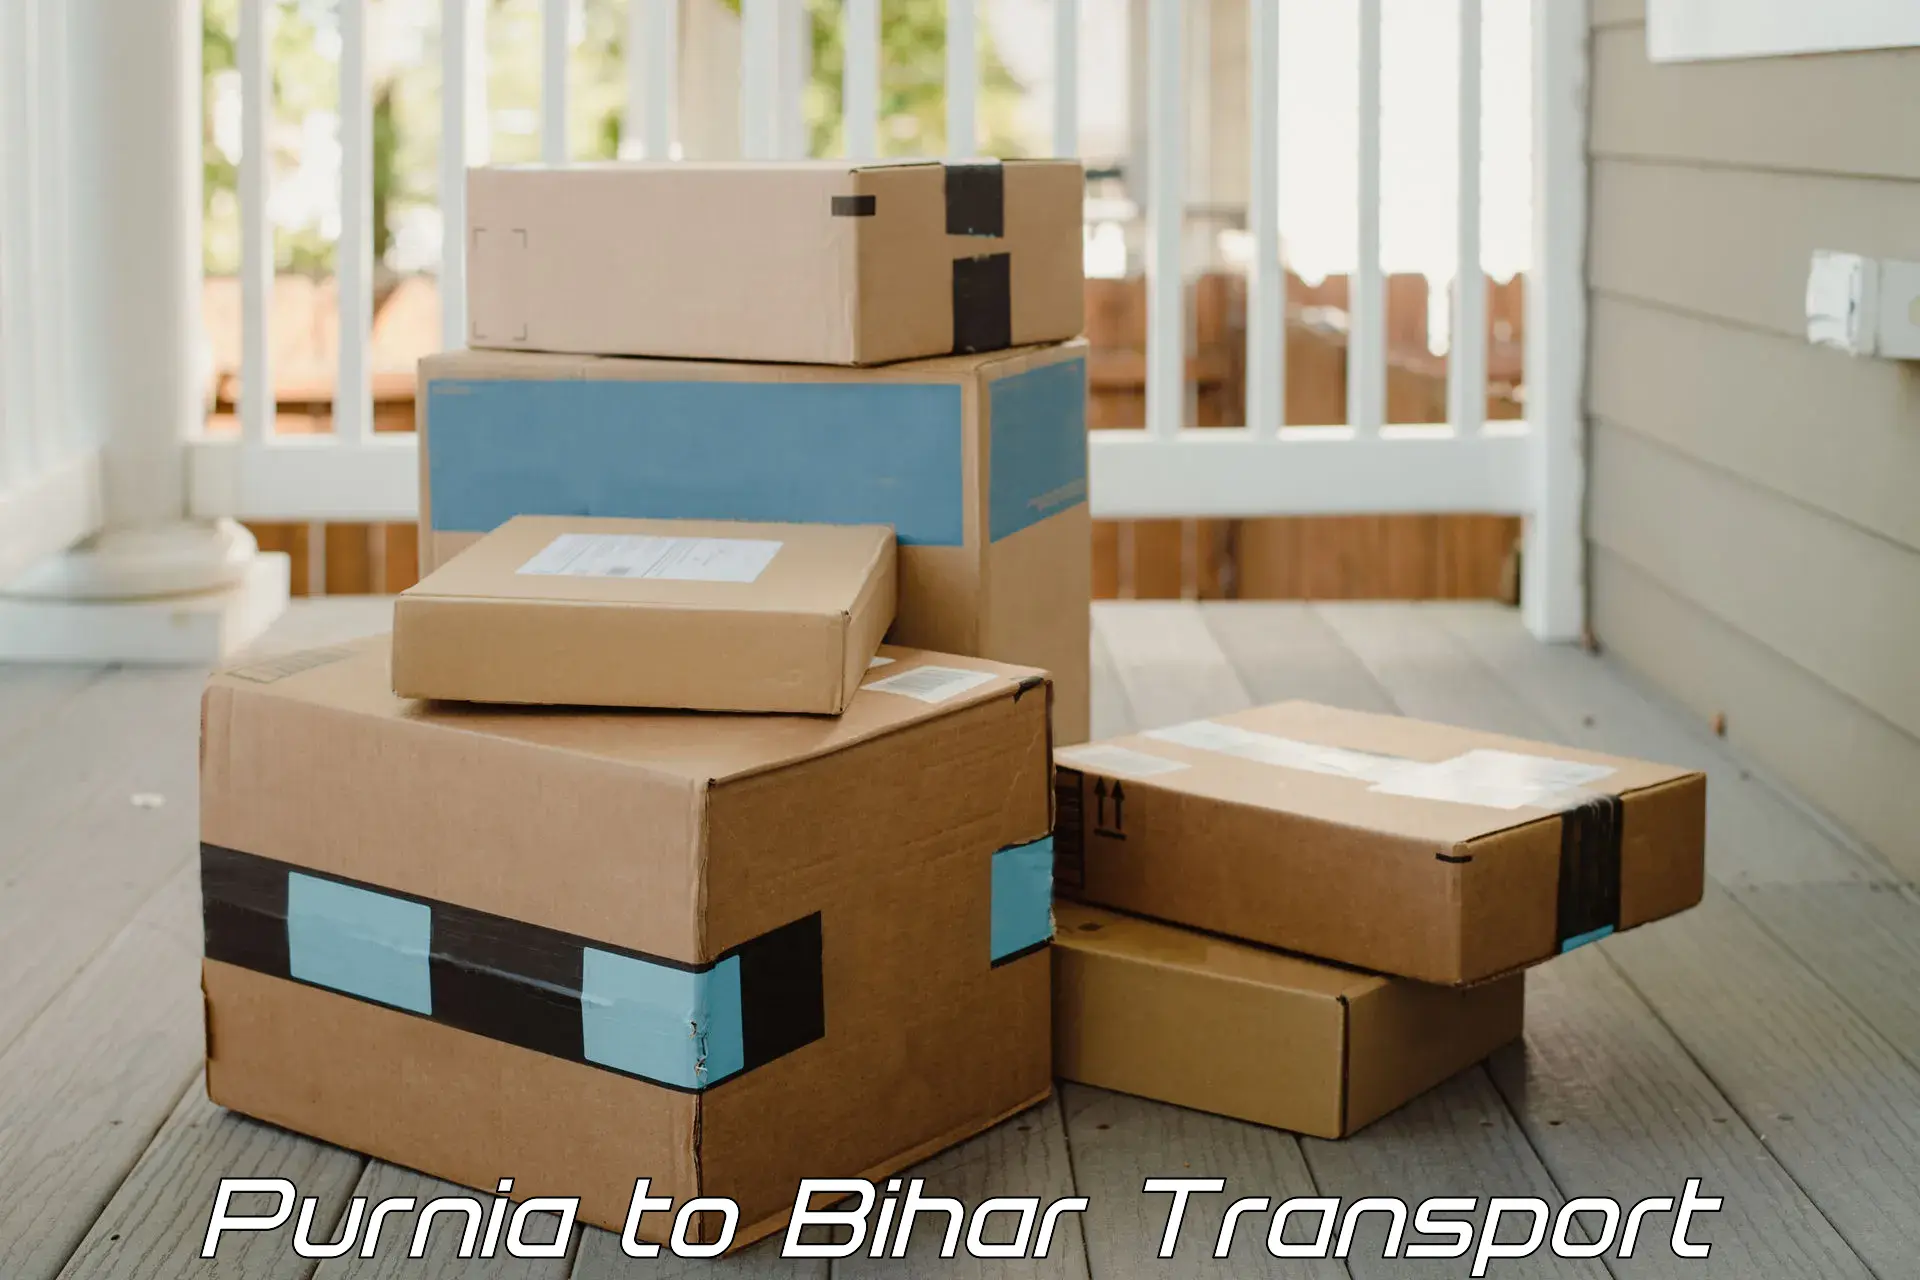 Delivery service Purnia to Biraul